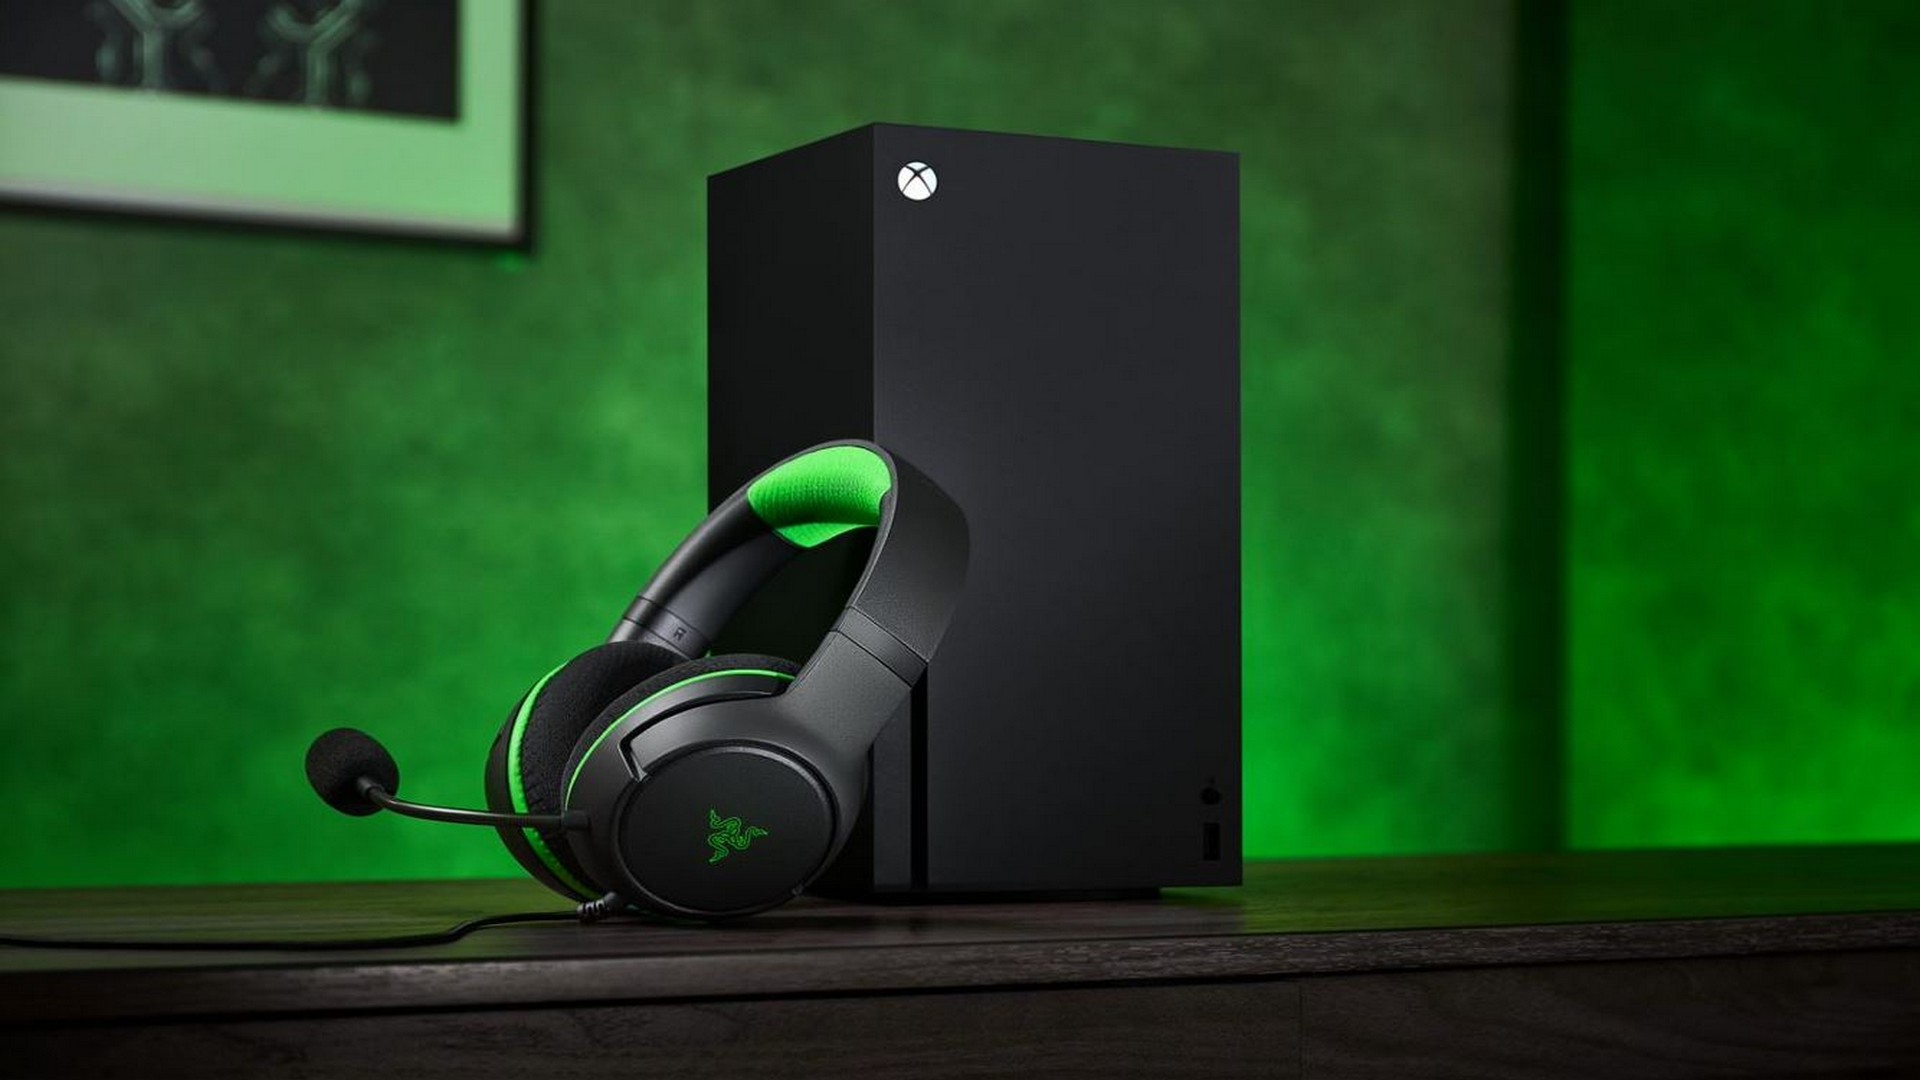 The New KAIRA X Joins Razer’s Expanding Family Of Console Gaming Hardware